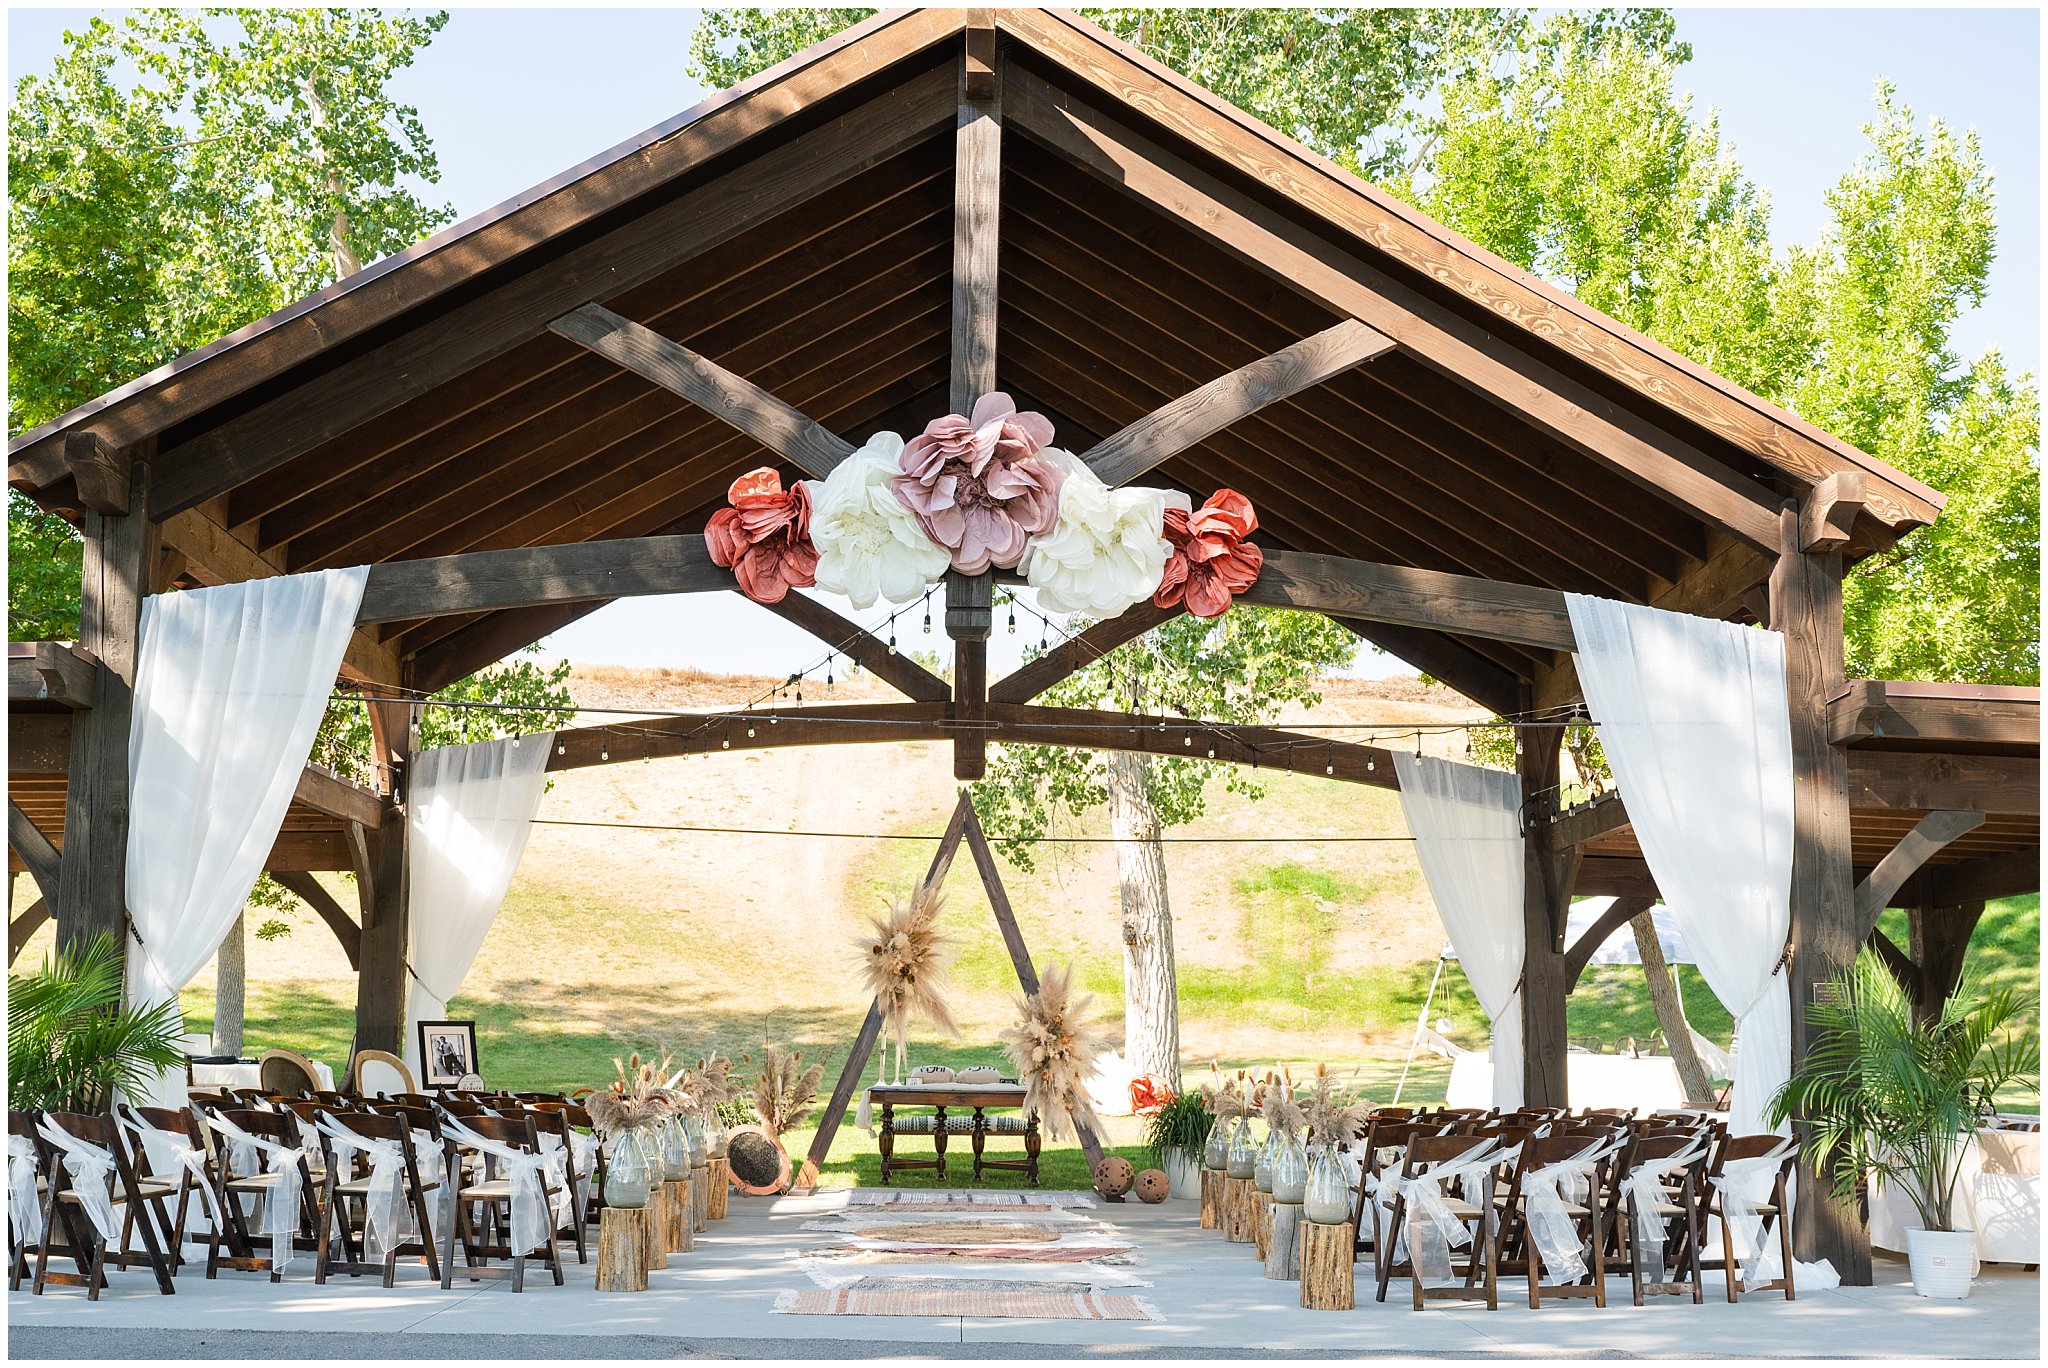 Pavilion setup and boho decor at Lions Park in Cache Valley | Logan Utah Outdoor Summer Wedding | Jessie and Dallin Photography